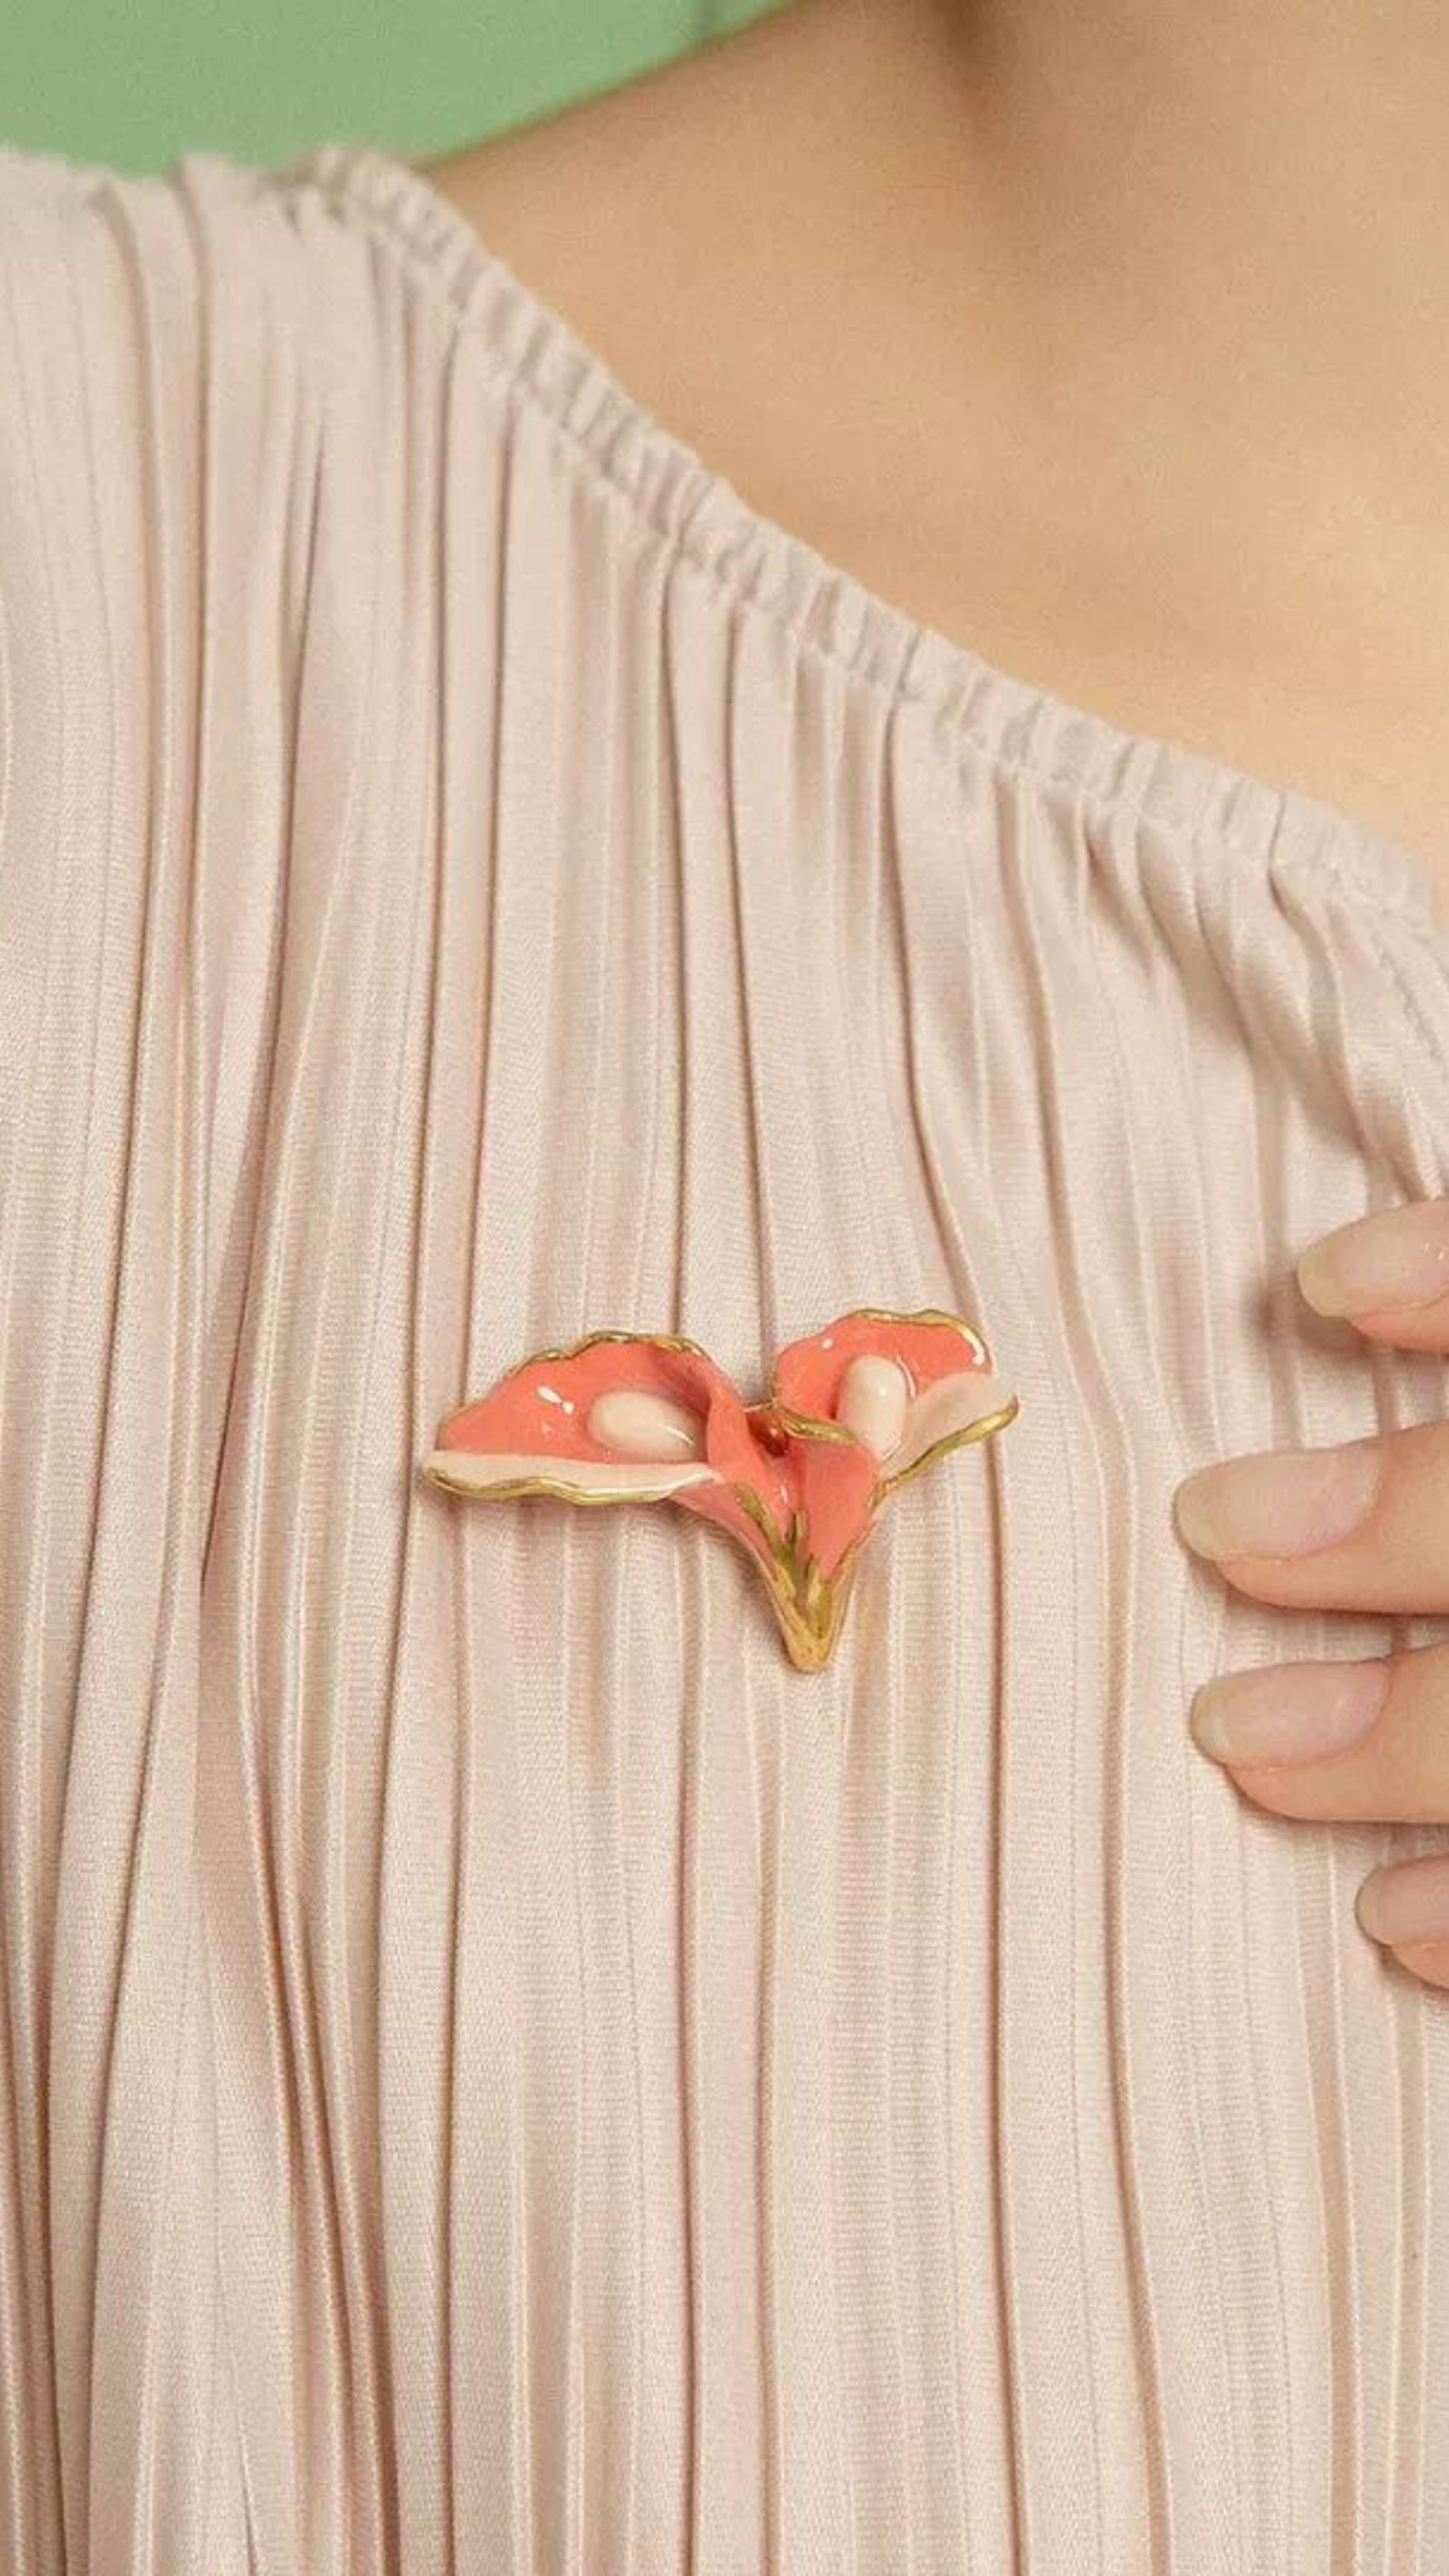 A delicate coral floral brooch with gold trim accents pinned on a pleated blush blouse.